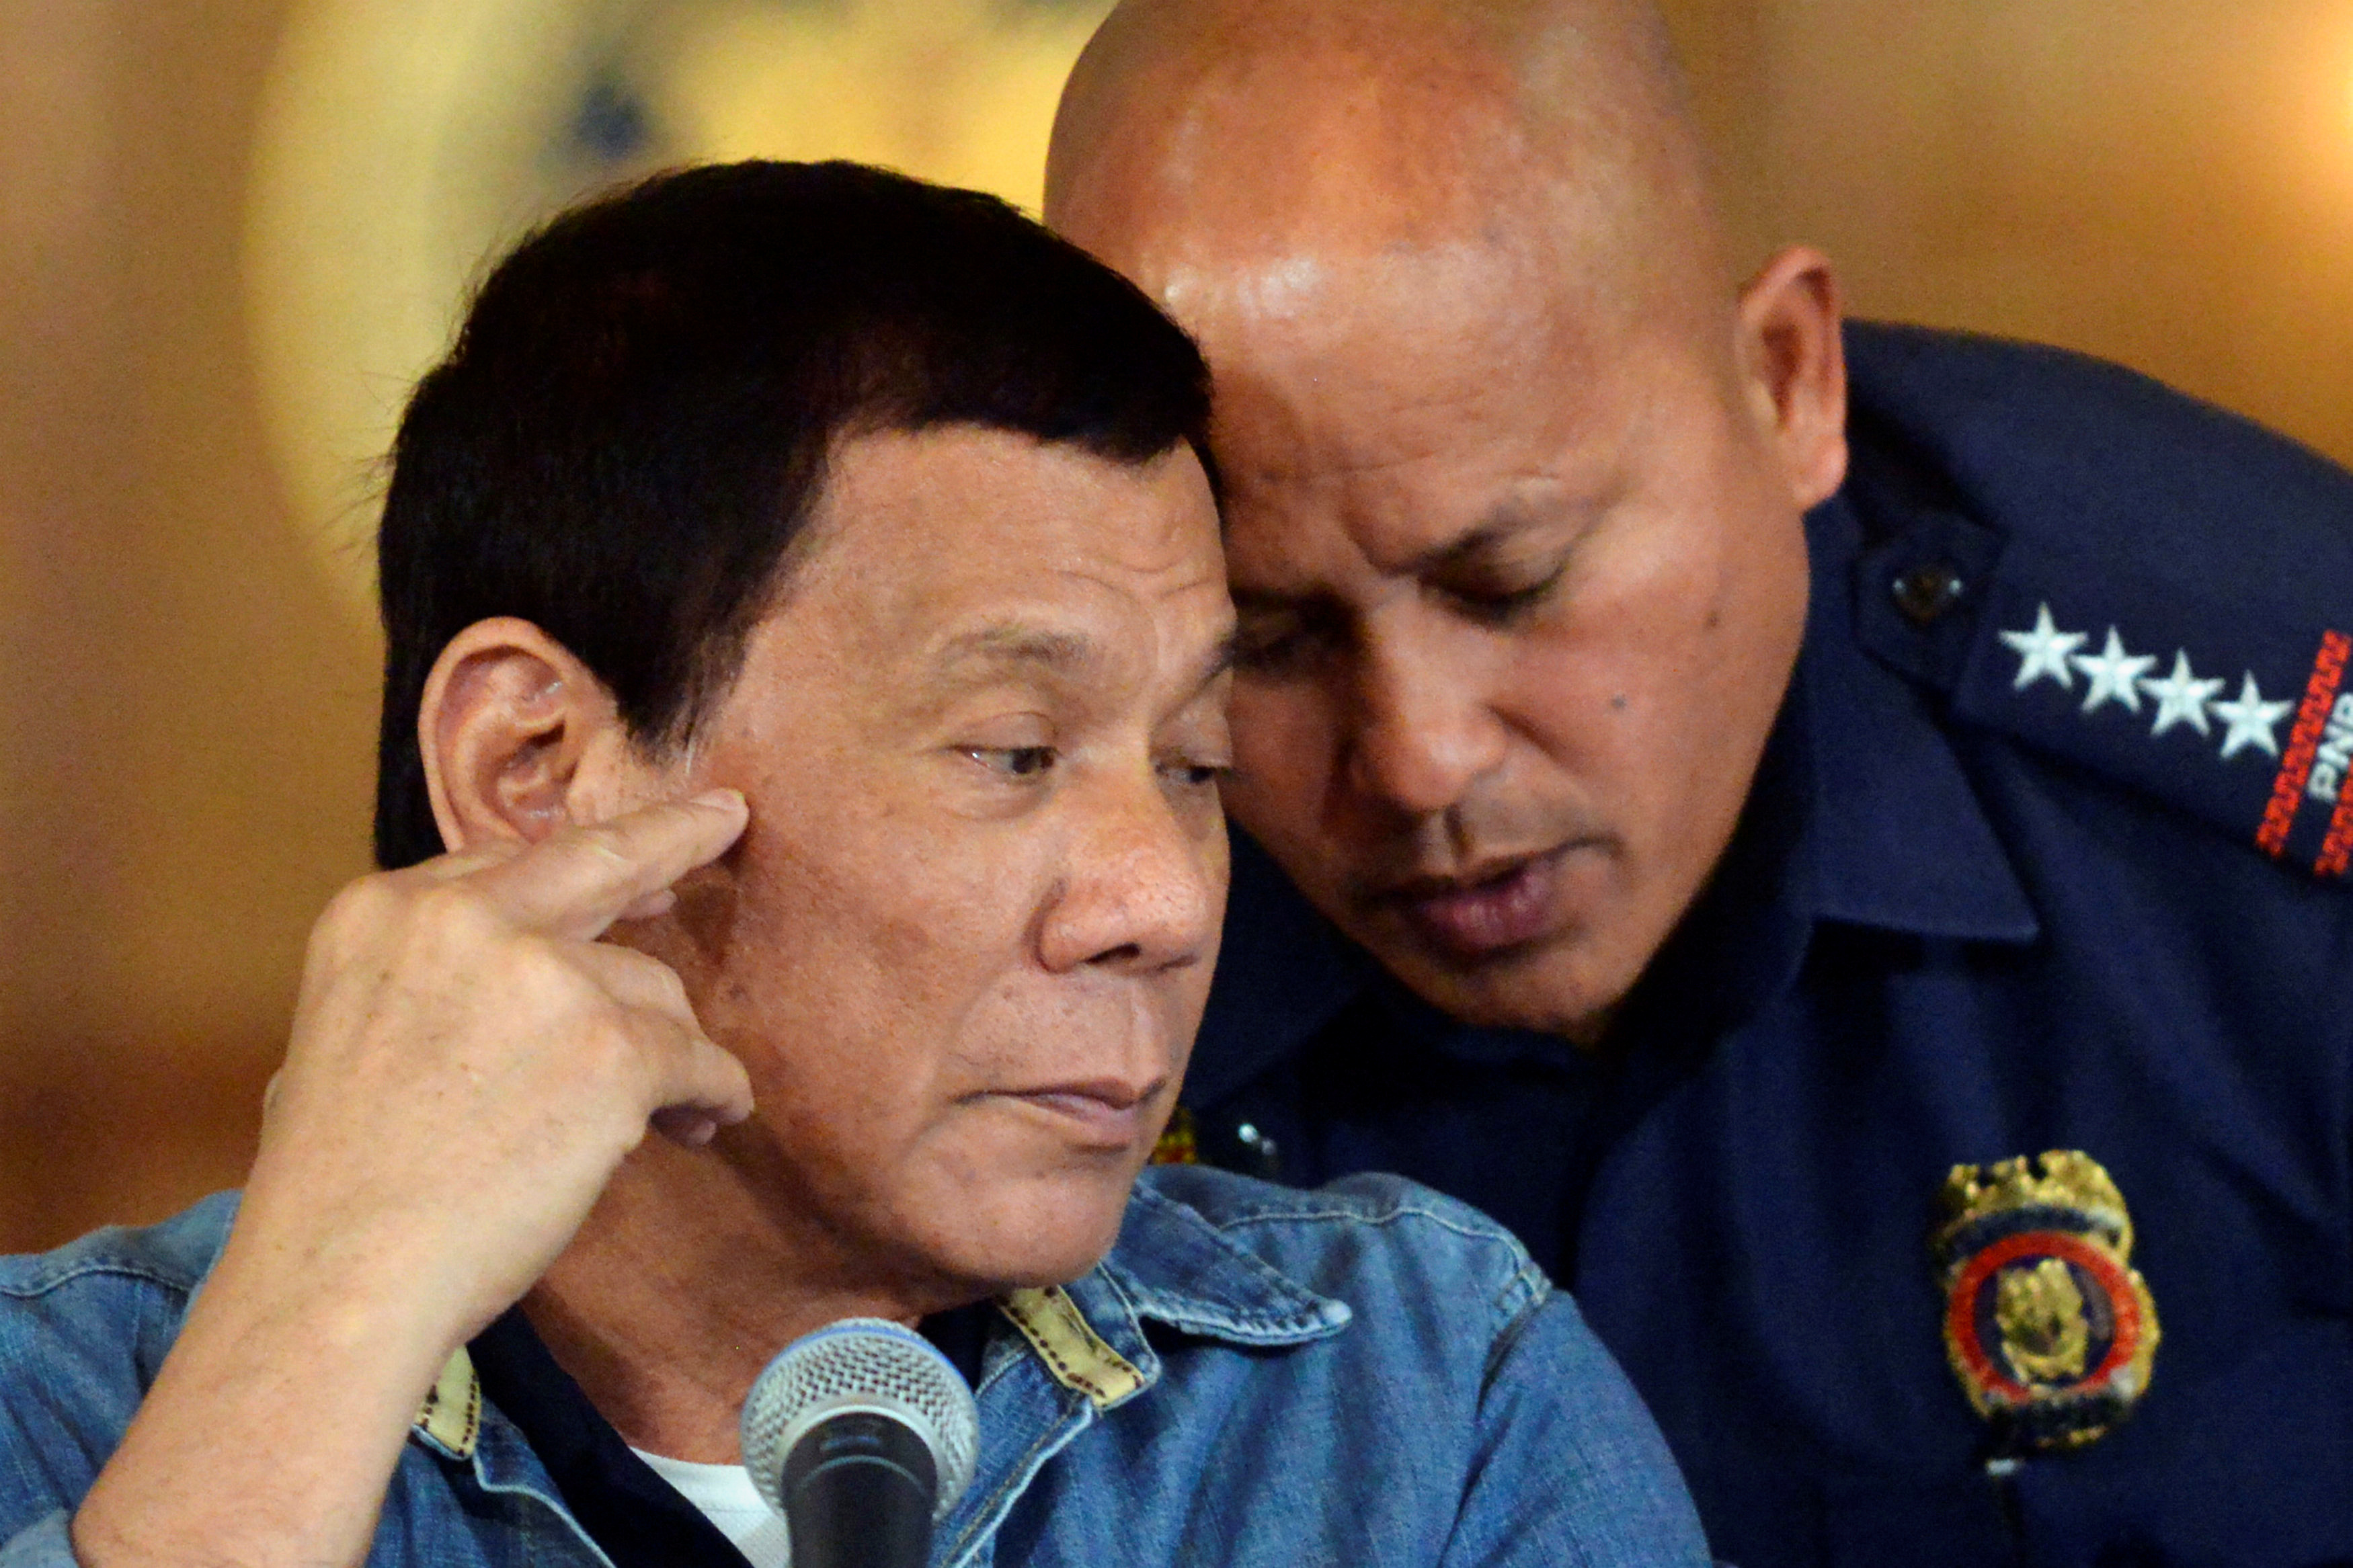 Philippine President Rodrigo Duterte listens to Philippine National Police (PNP) Director General Ronald Dela Rosa at the presidential palace in Manila, Philippines on Jan. 29, 2017. (Ezra Acayan—Reuters)